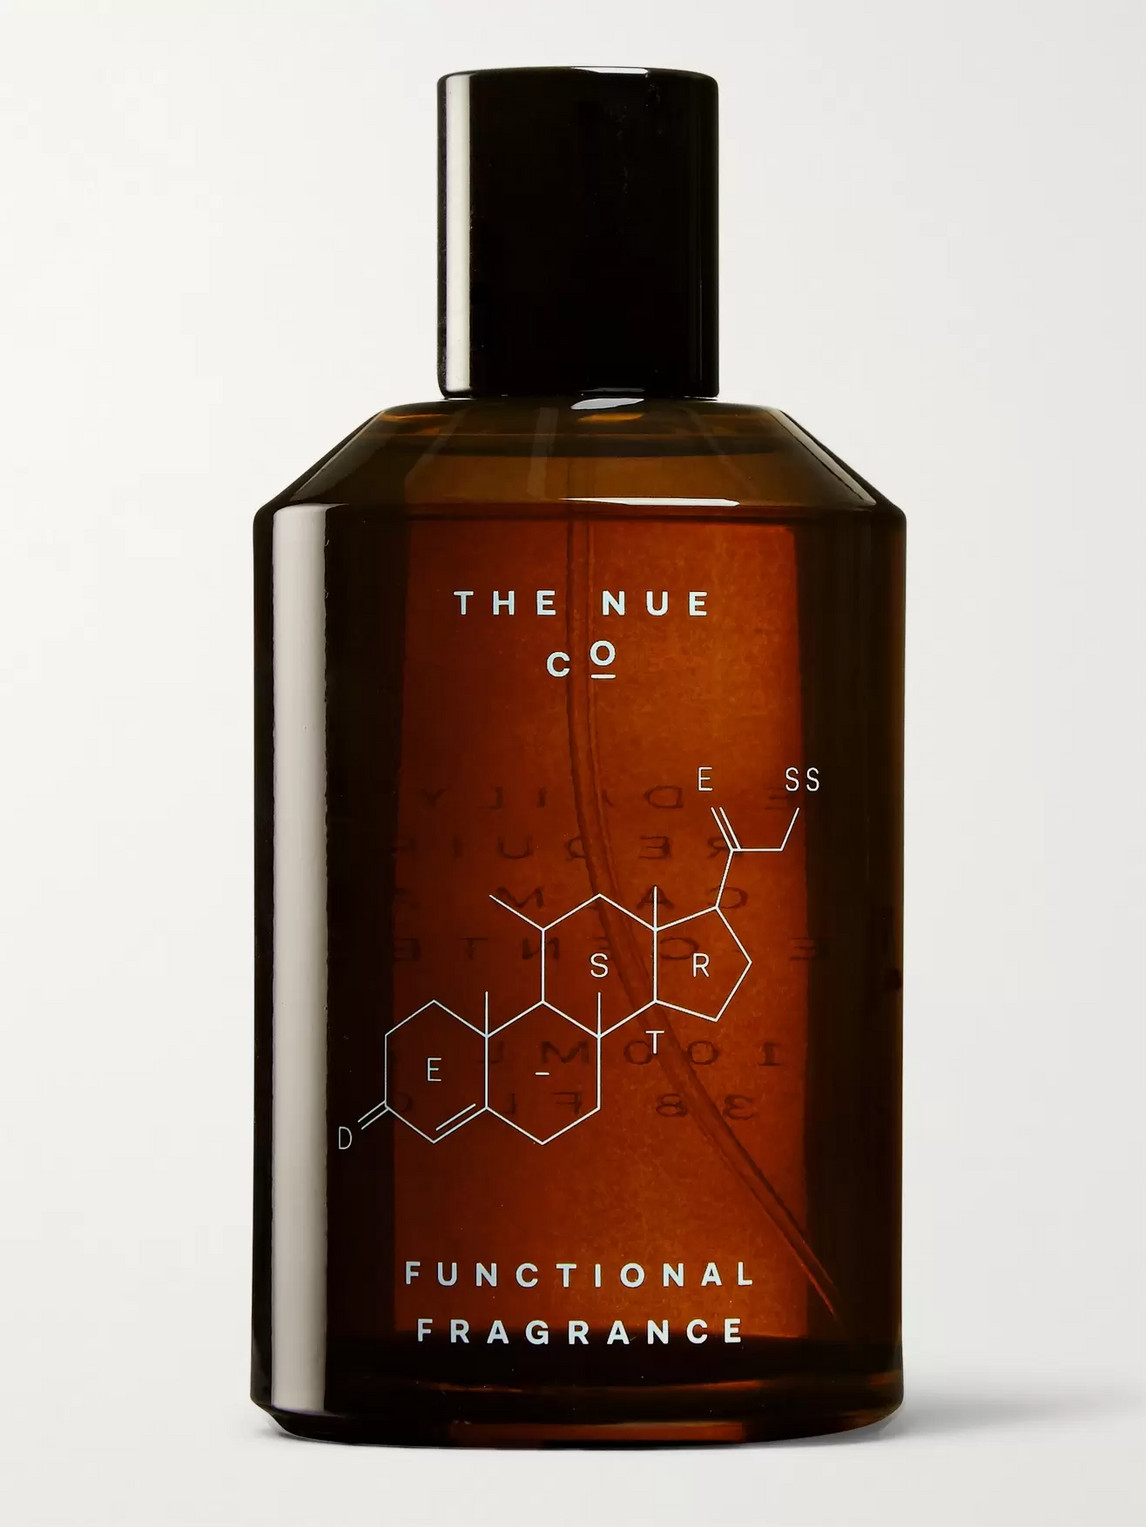 The Nue Co Functional Fragrance, 100ml In Colourless